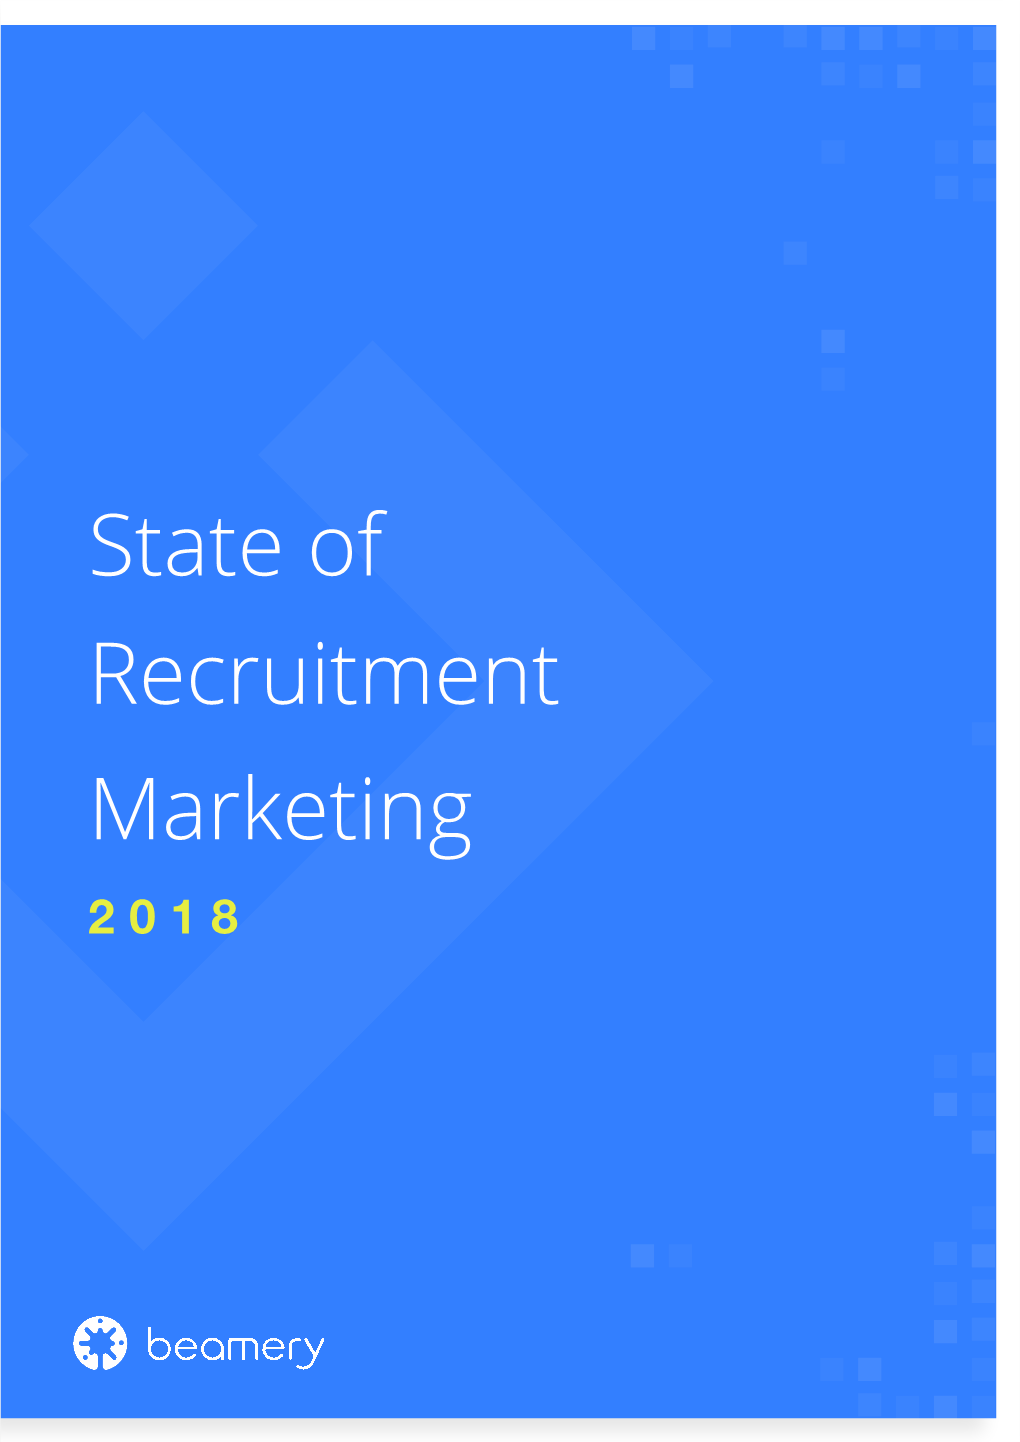 State of Recruitment Marketing 2018 Contents